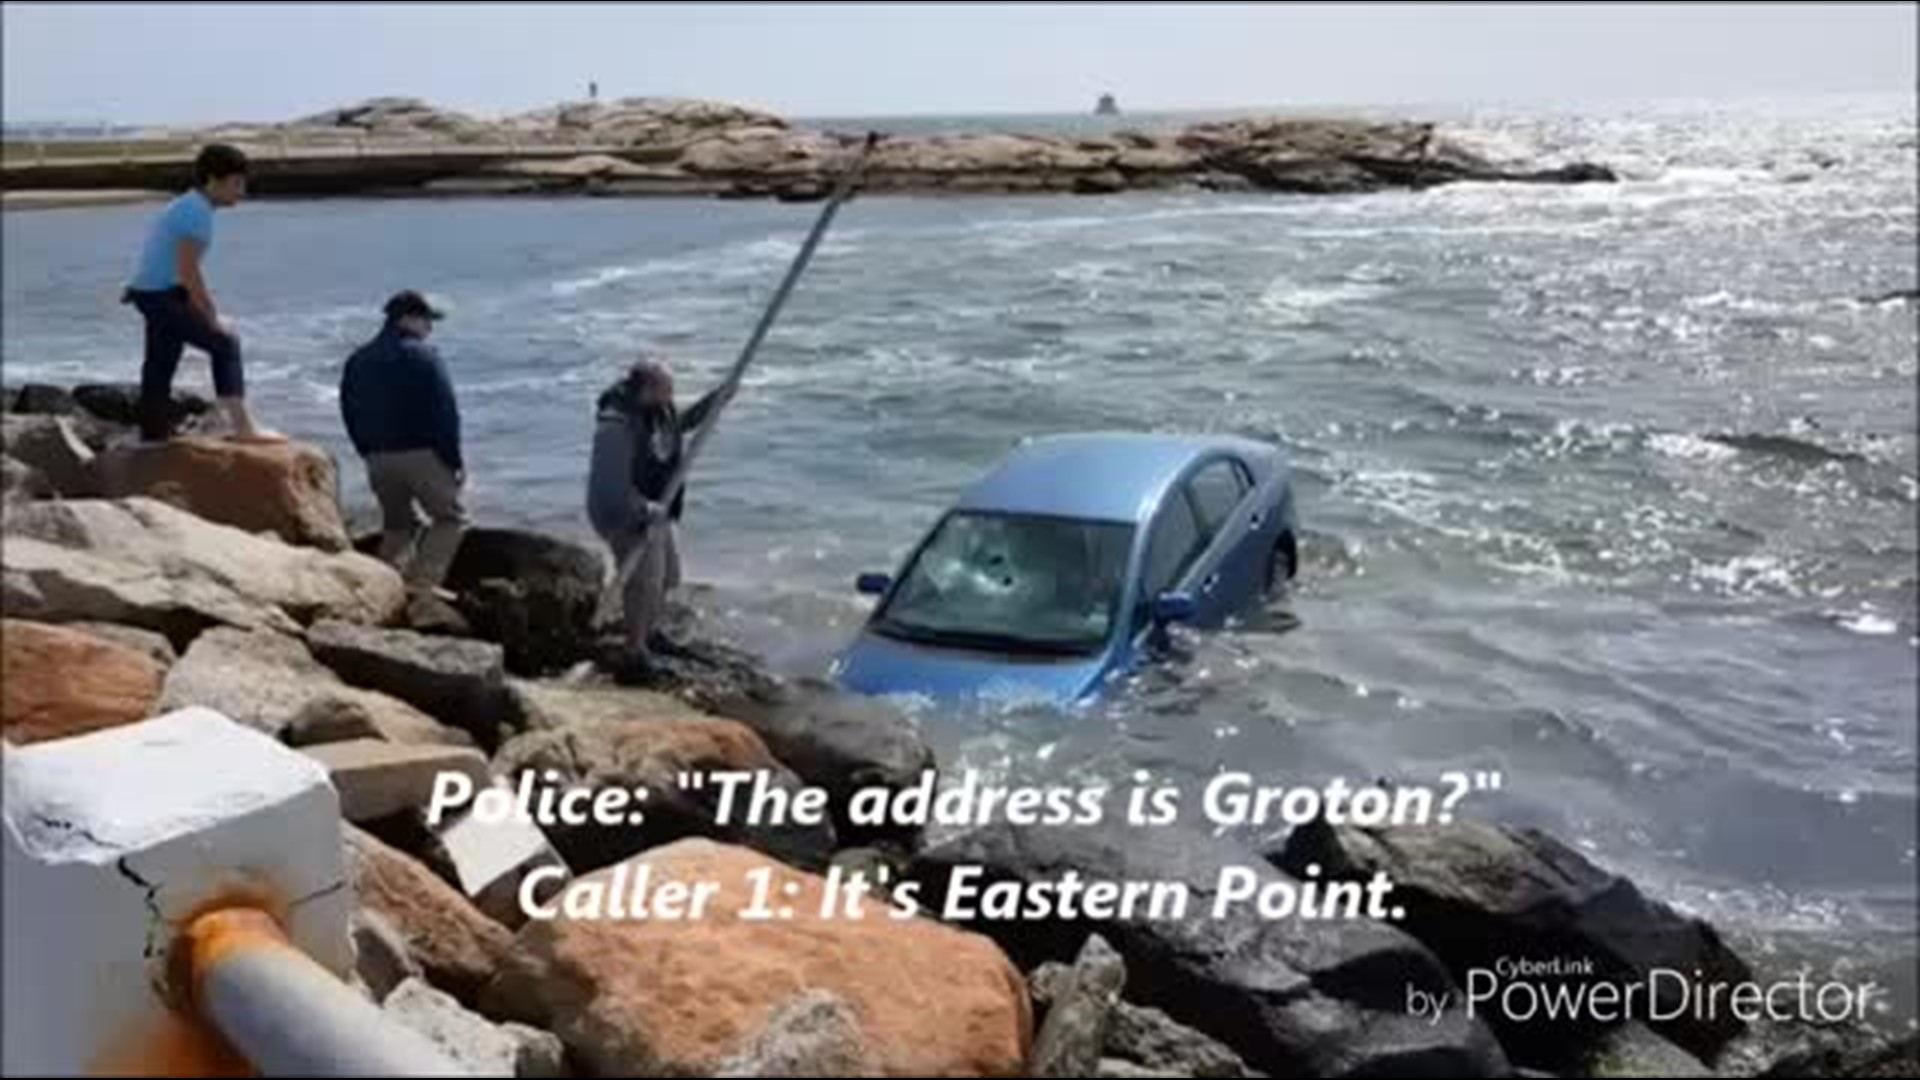 Several call 911 after elderly woman crashes into water at Groton beach